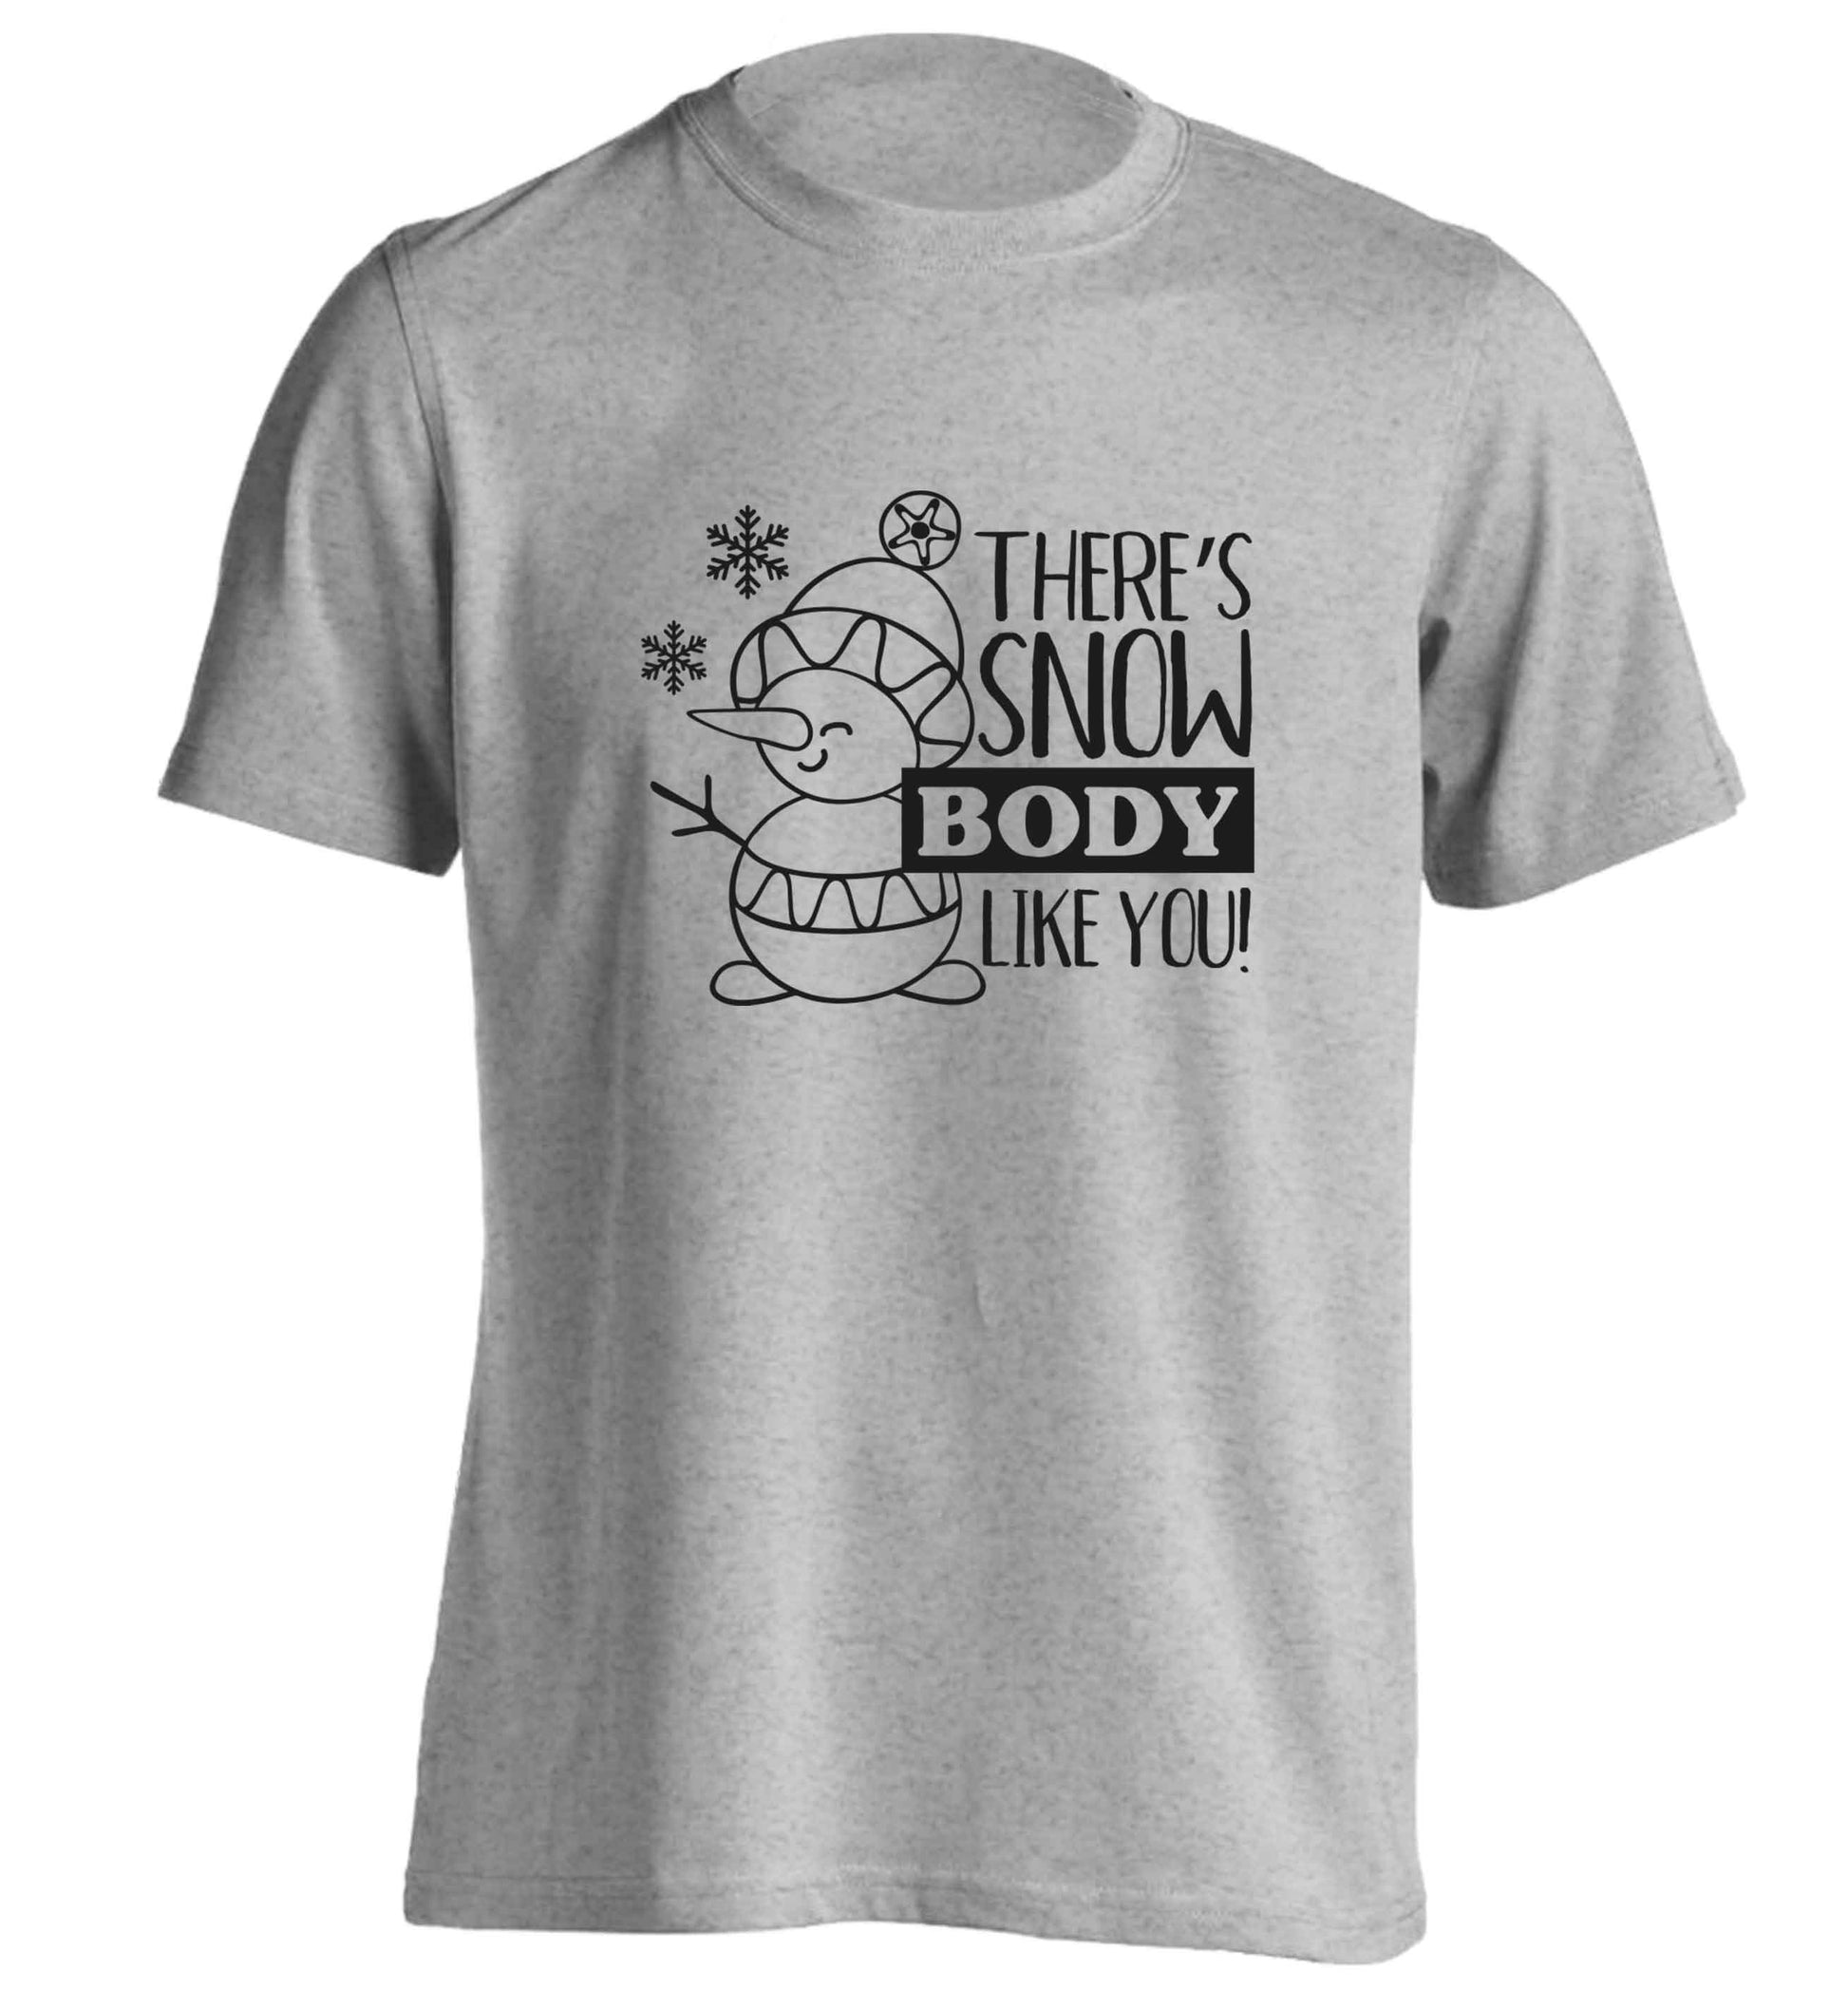 There's snow body like you adults unisex grey Tshirt 2XL